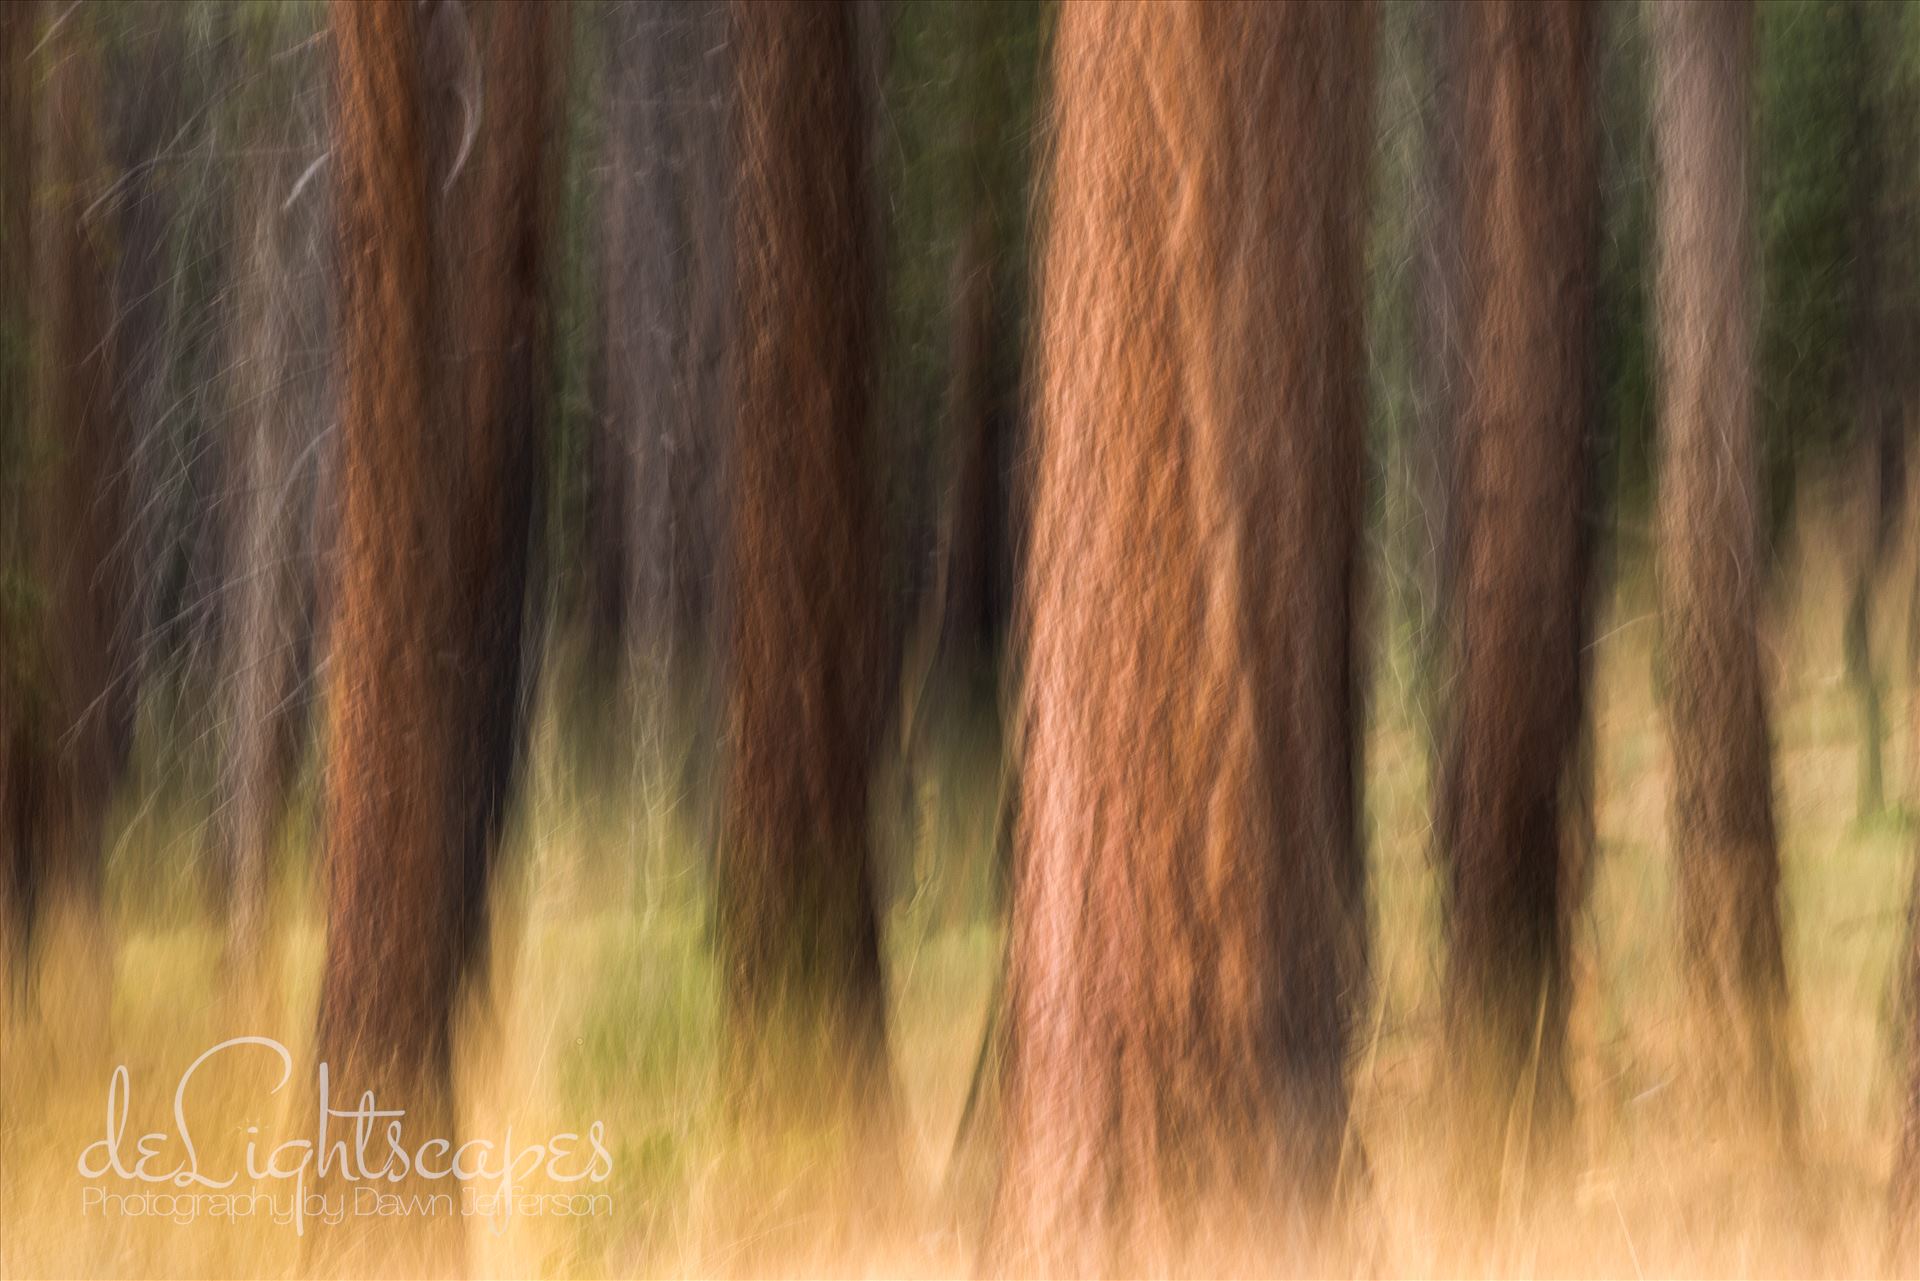 Pining - Pine trees in Tahoe using Intentional Camera Movement (ICM- purposeful movement of the camera while the shutter is open causing intentional blurring of your subject.) This is one of my favorite techniques for making dreamy abstracts. by Dawn Jefferson